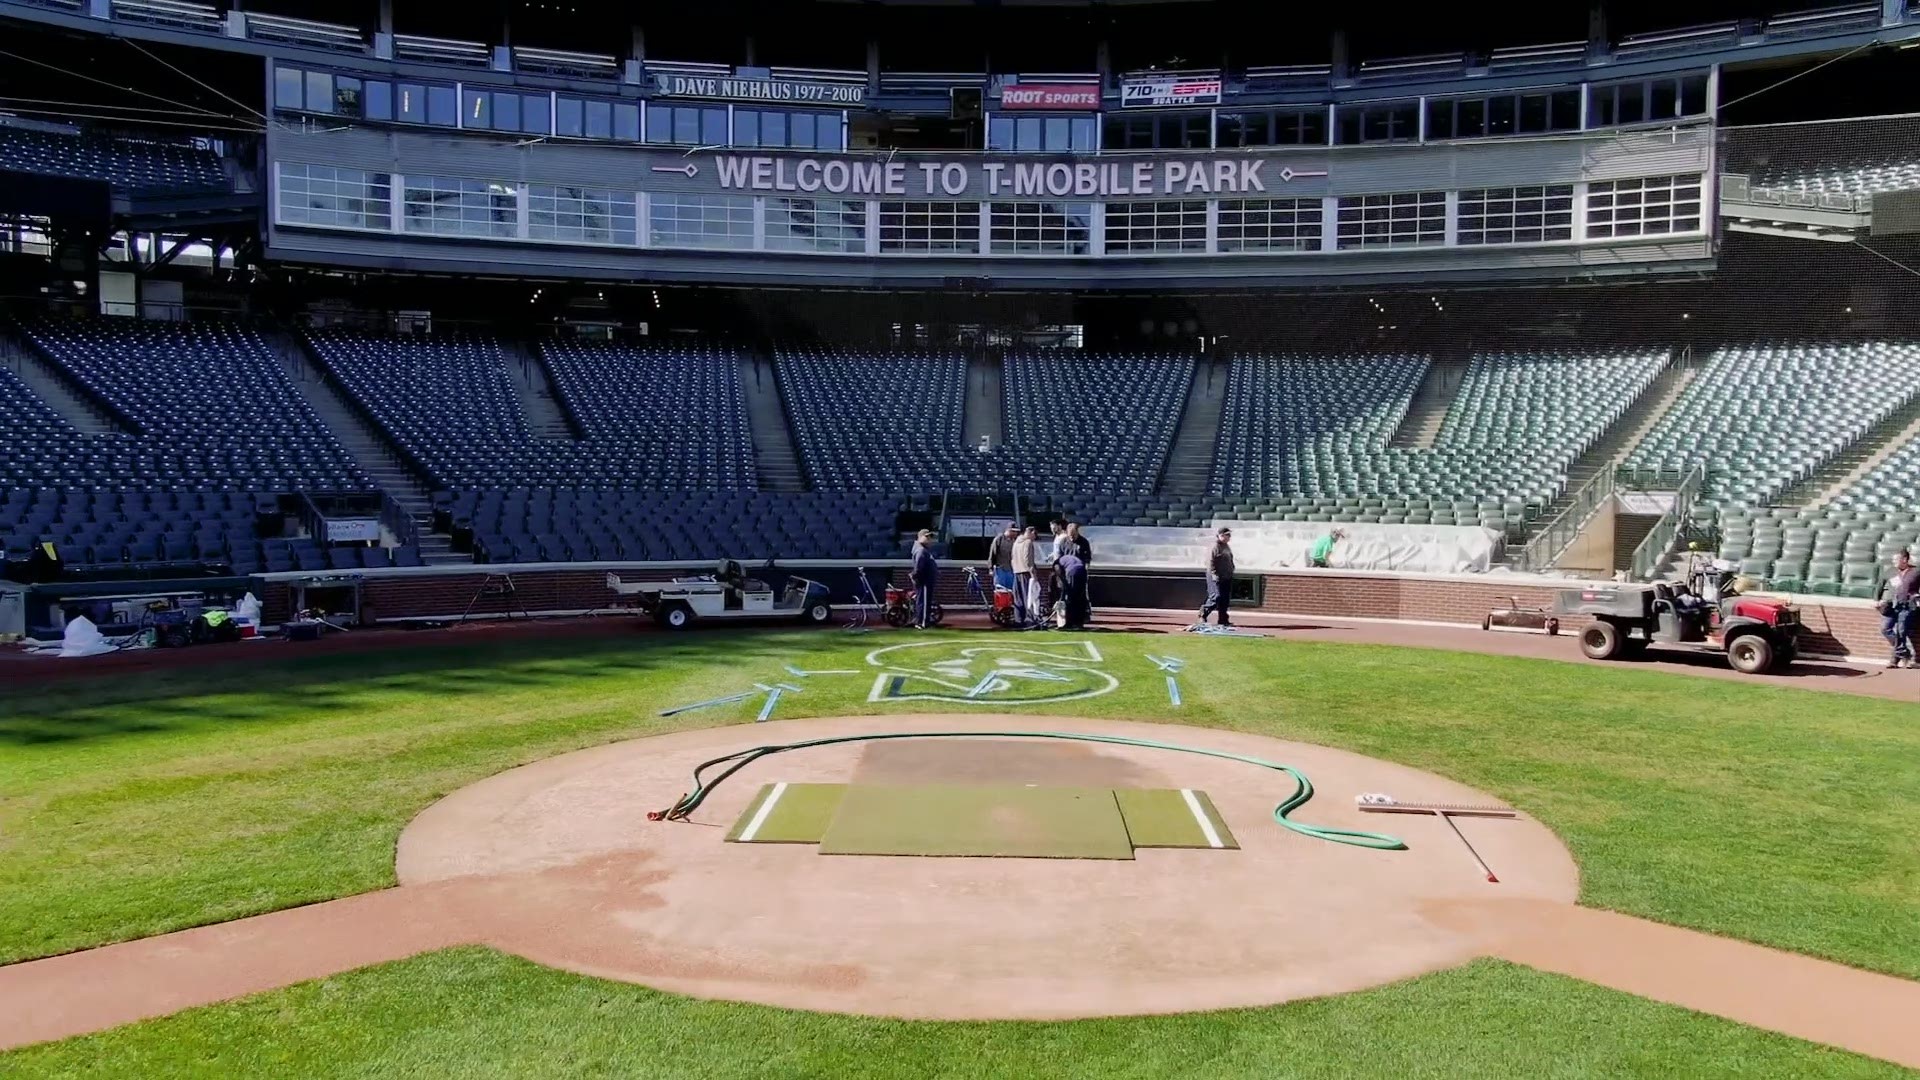 Watch as crews put the finishing touches on T-Mobile Park for opening day of the 2019 baseball season.